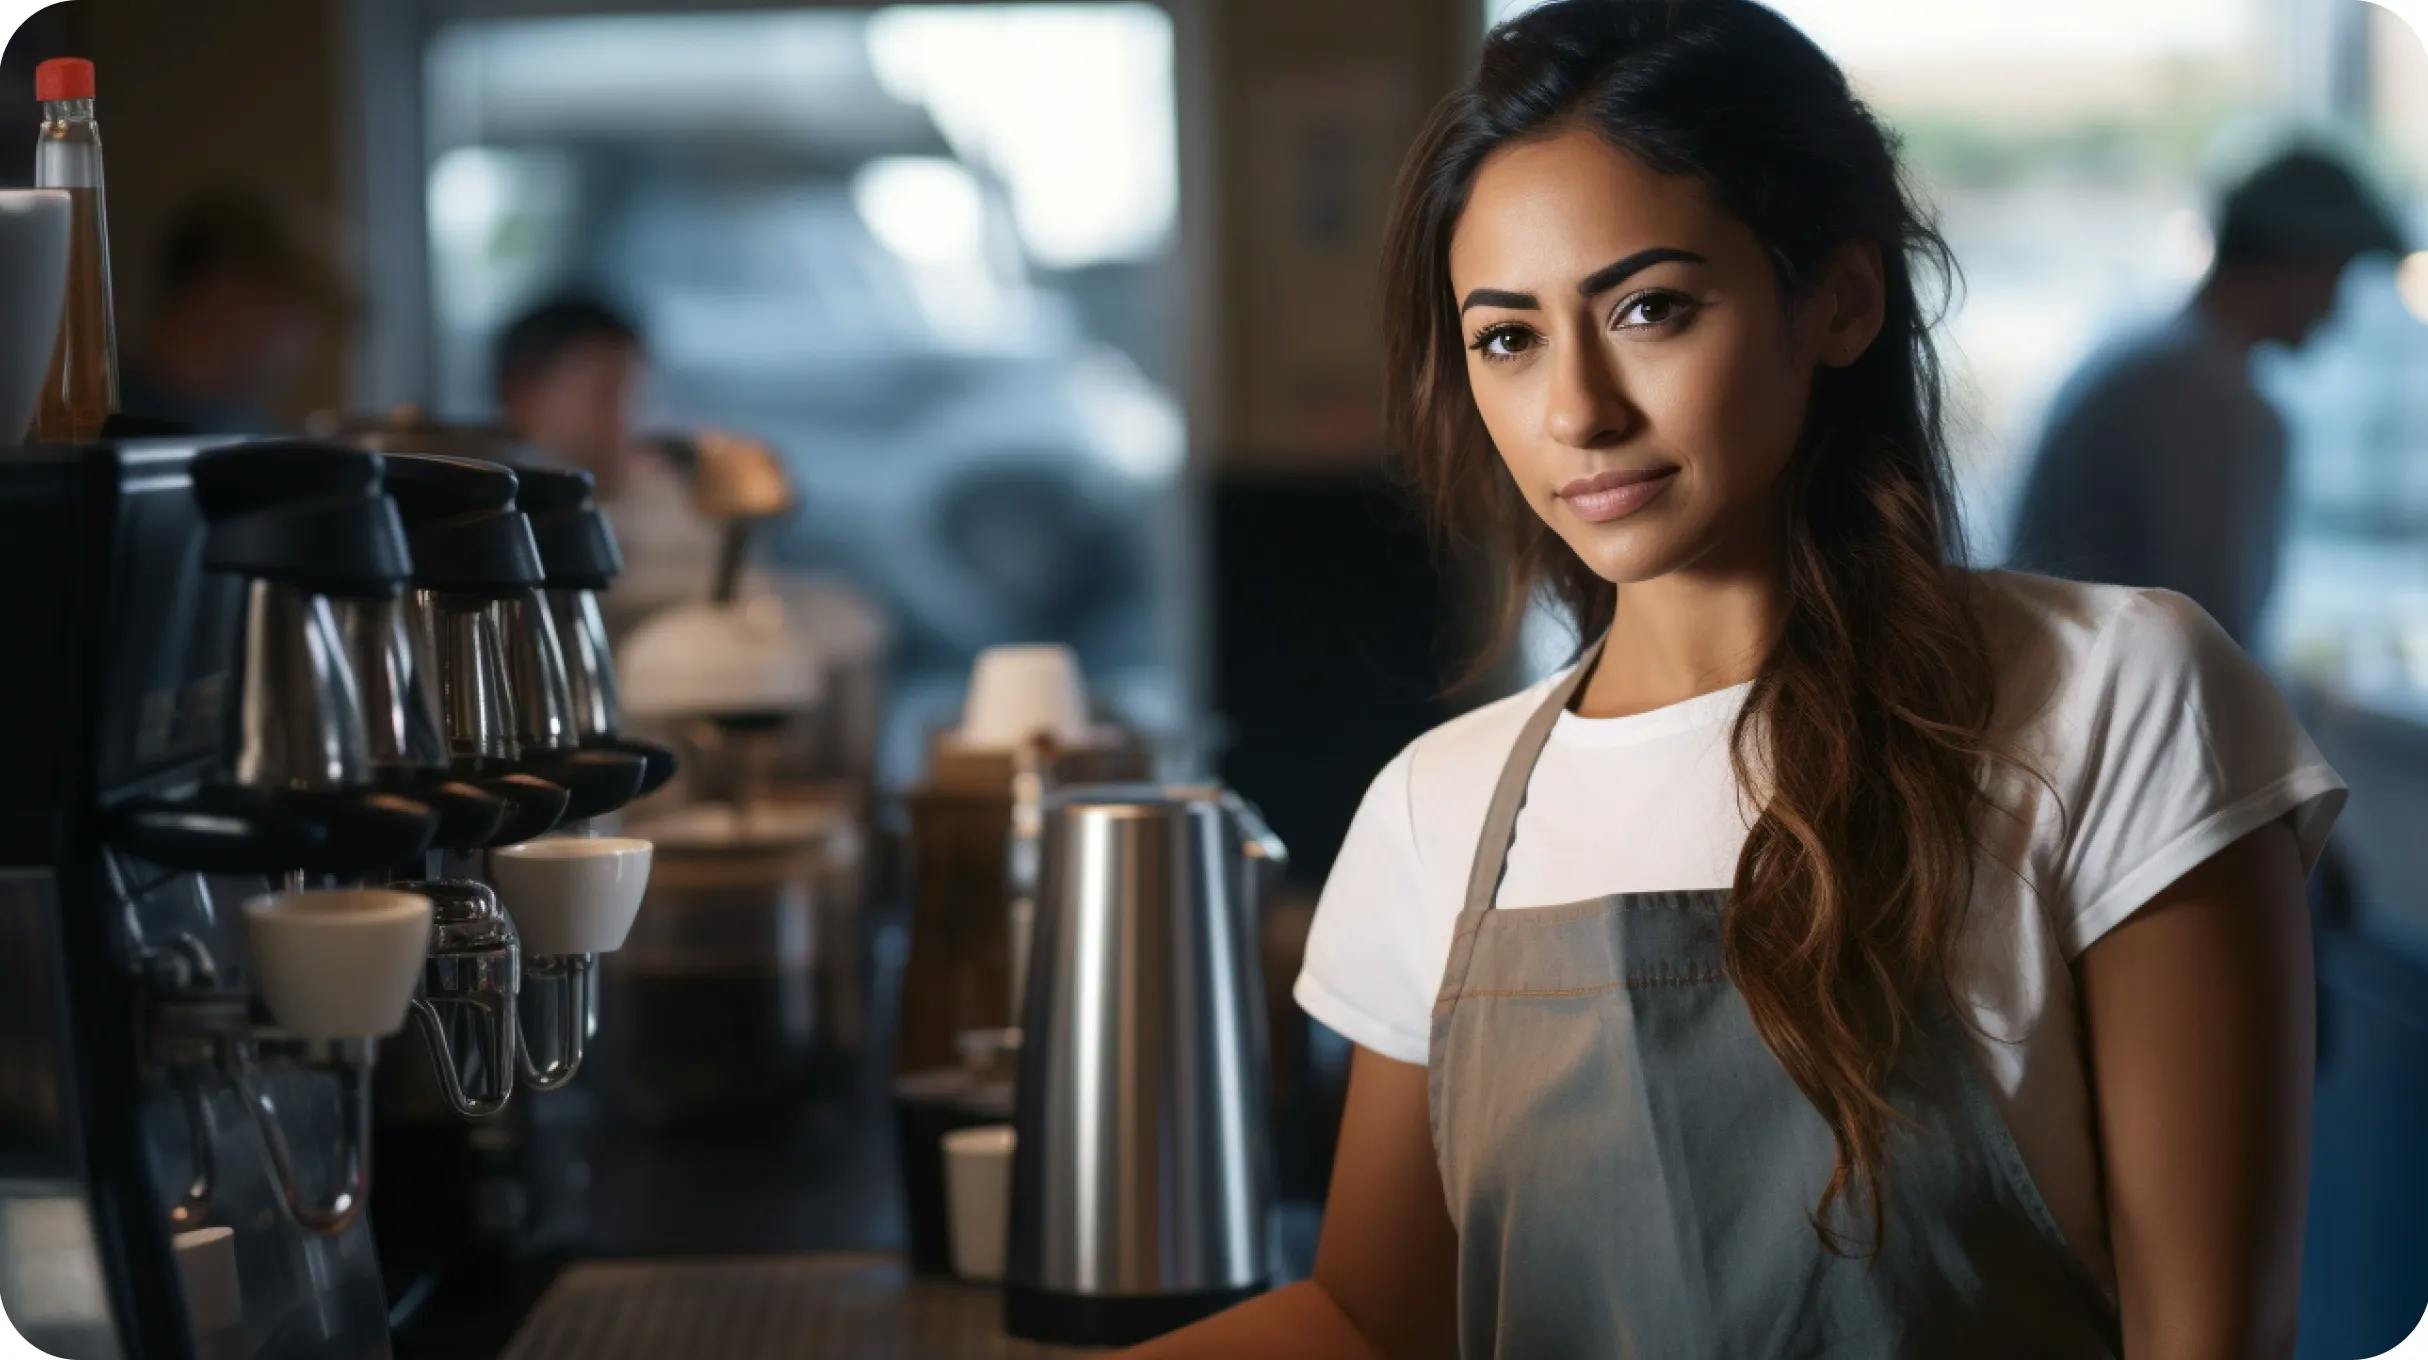 Woman in a coffee shop, standing near a coffee machine looking at the camera